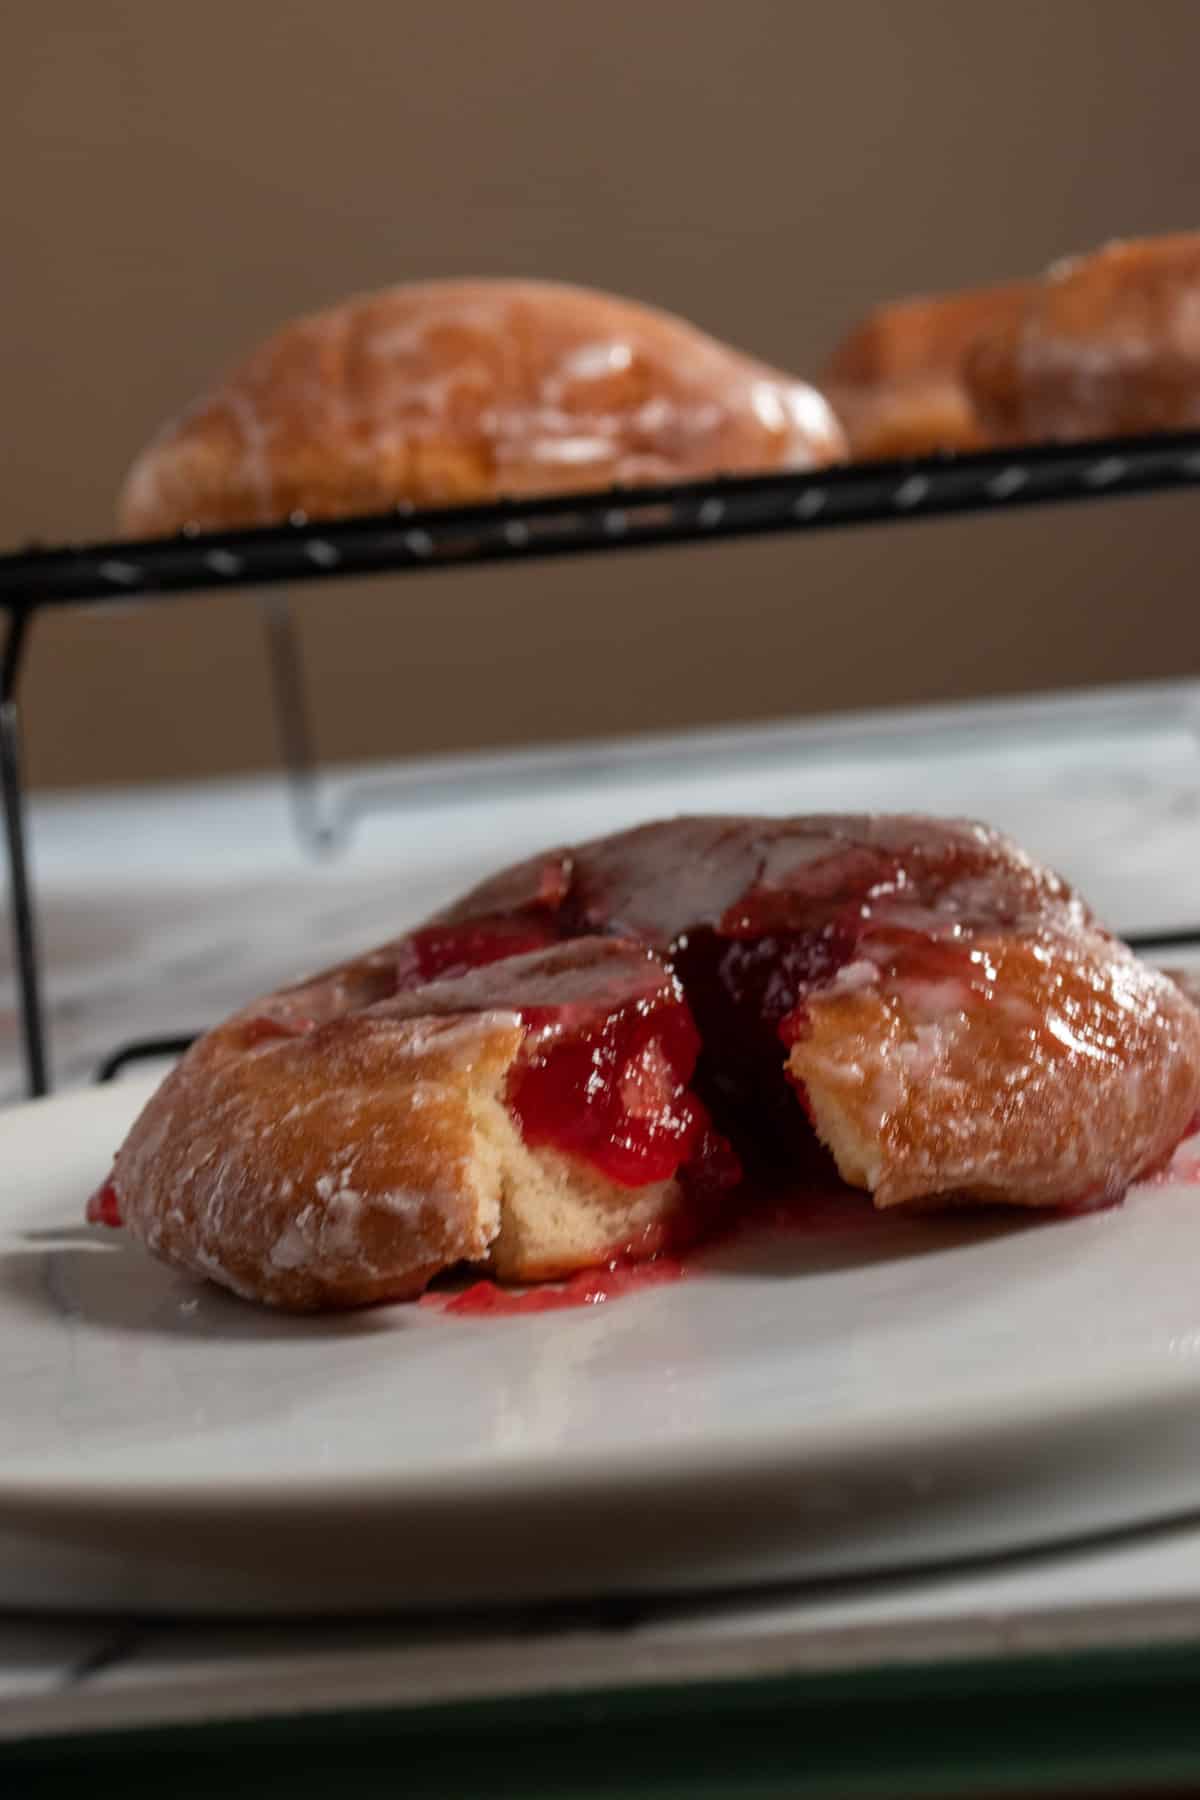 A low shot of my raspberry filled donuts. The one in the foreground is filled but the ones in the background sit on a wire racked unfilled.